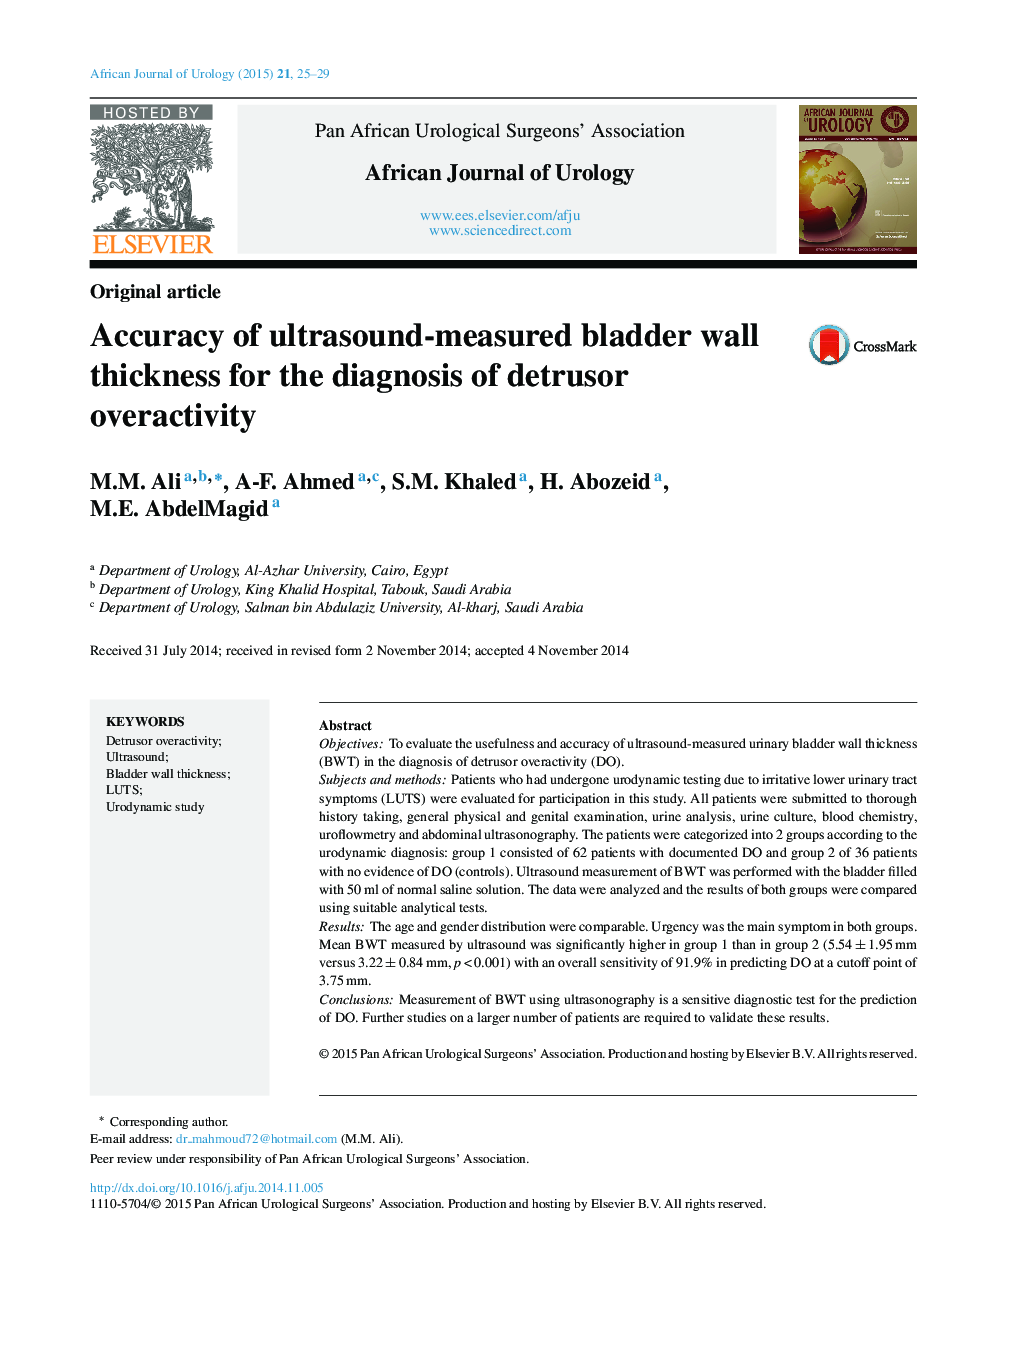 Accuracy of ultrasound-measured bladder wall thickness for the diagnosis of detrusor overactivity 